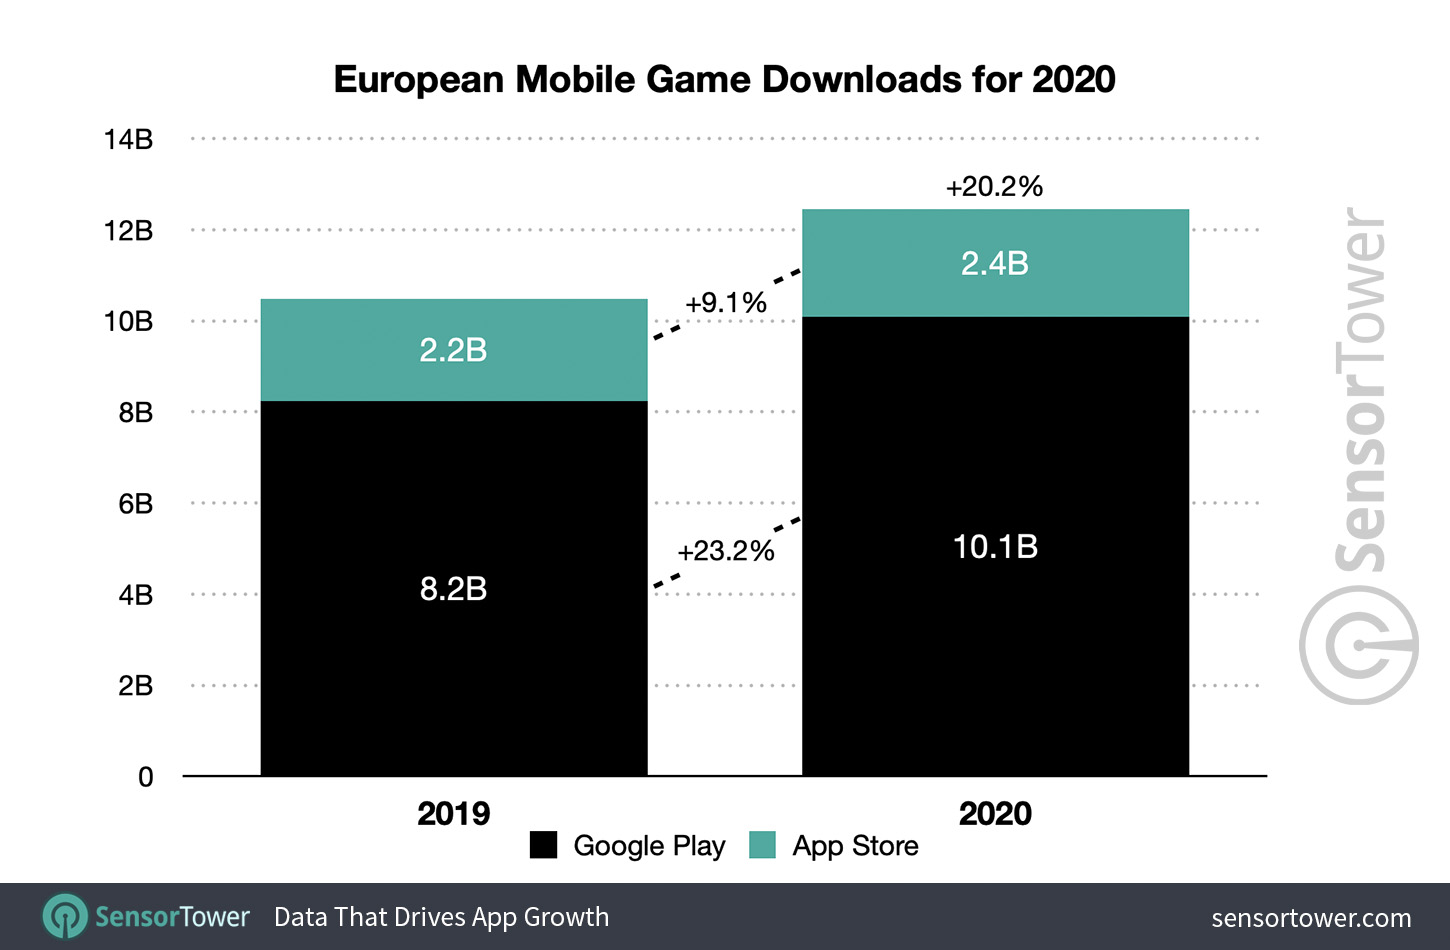 European Mobile Games Downloads for 2020